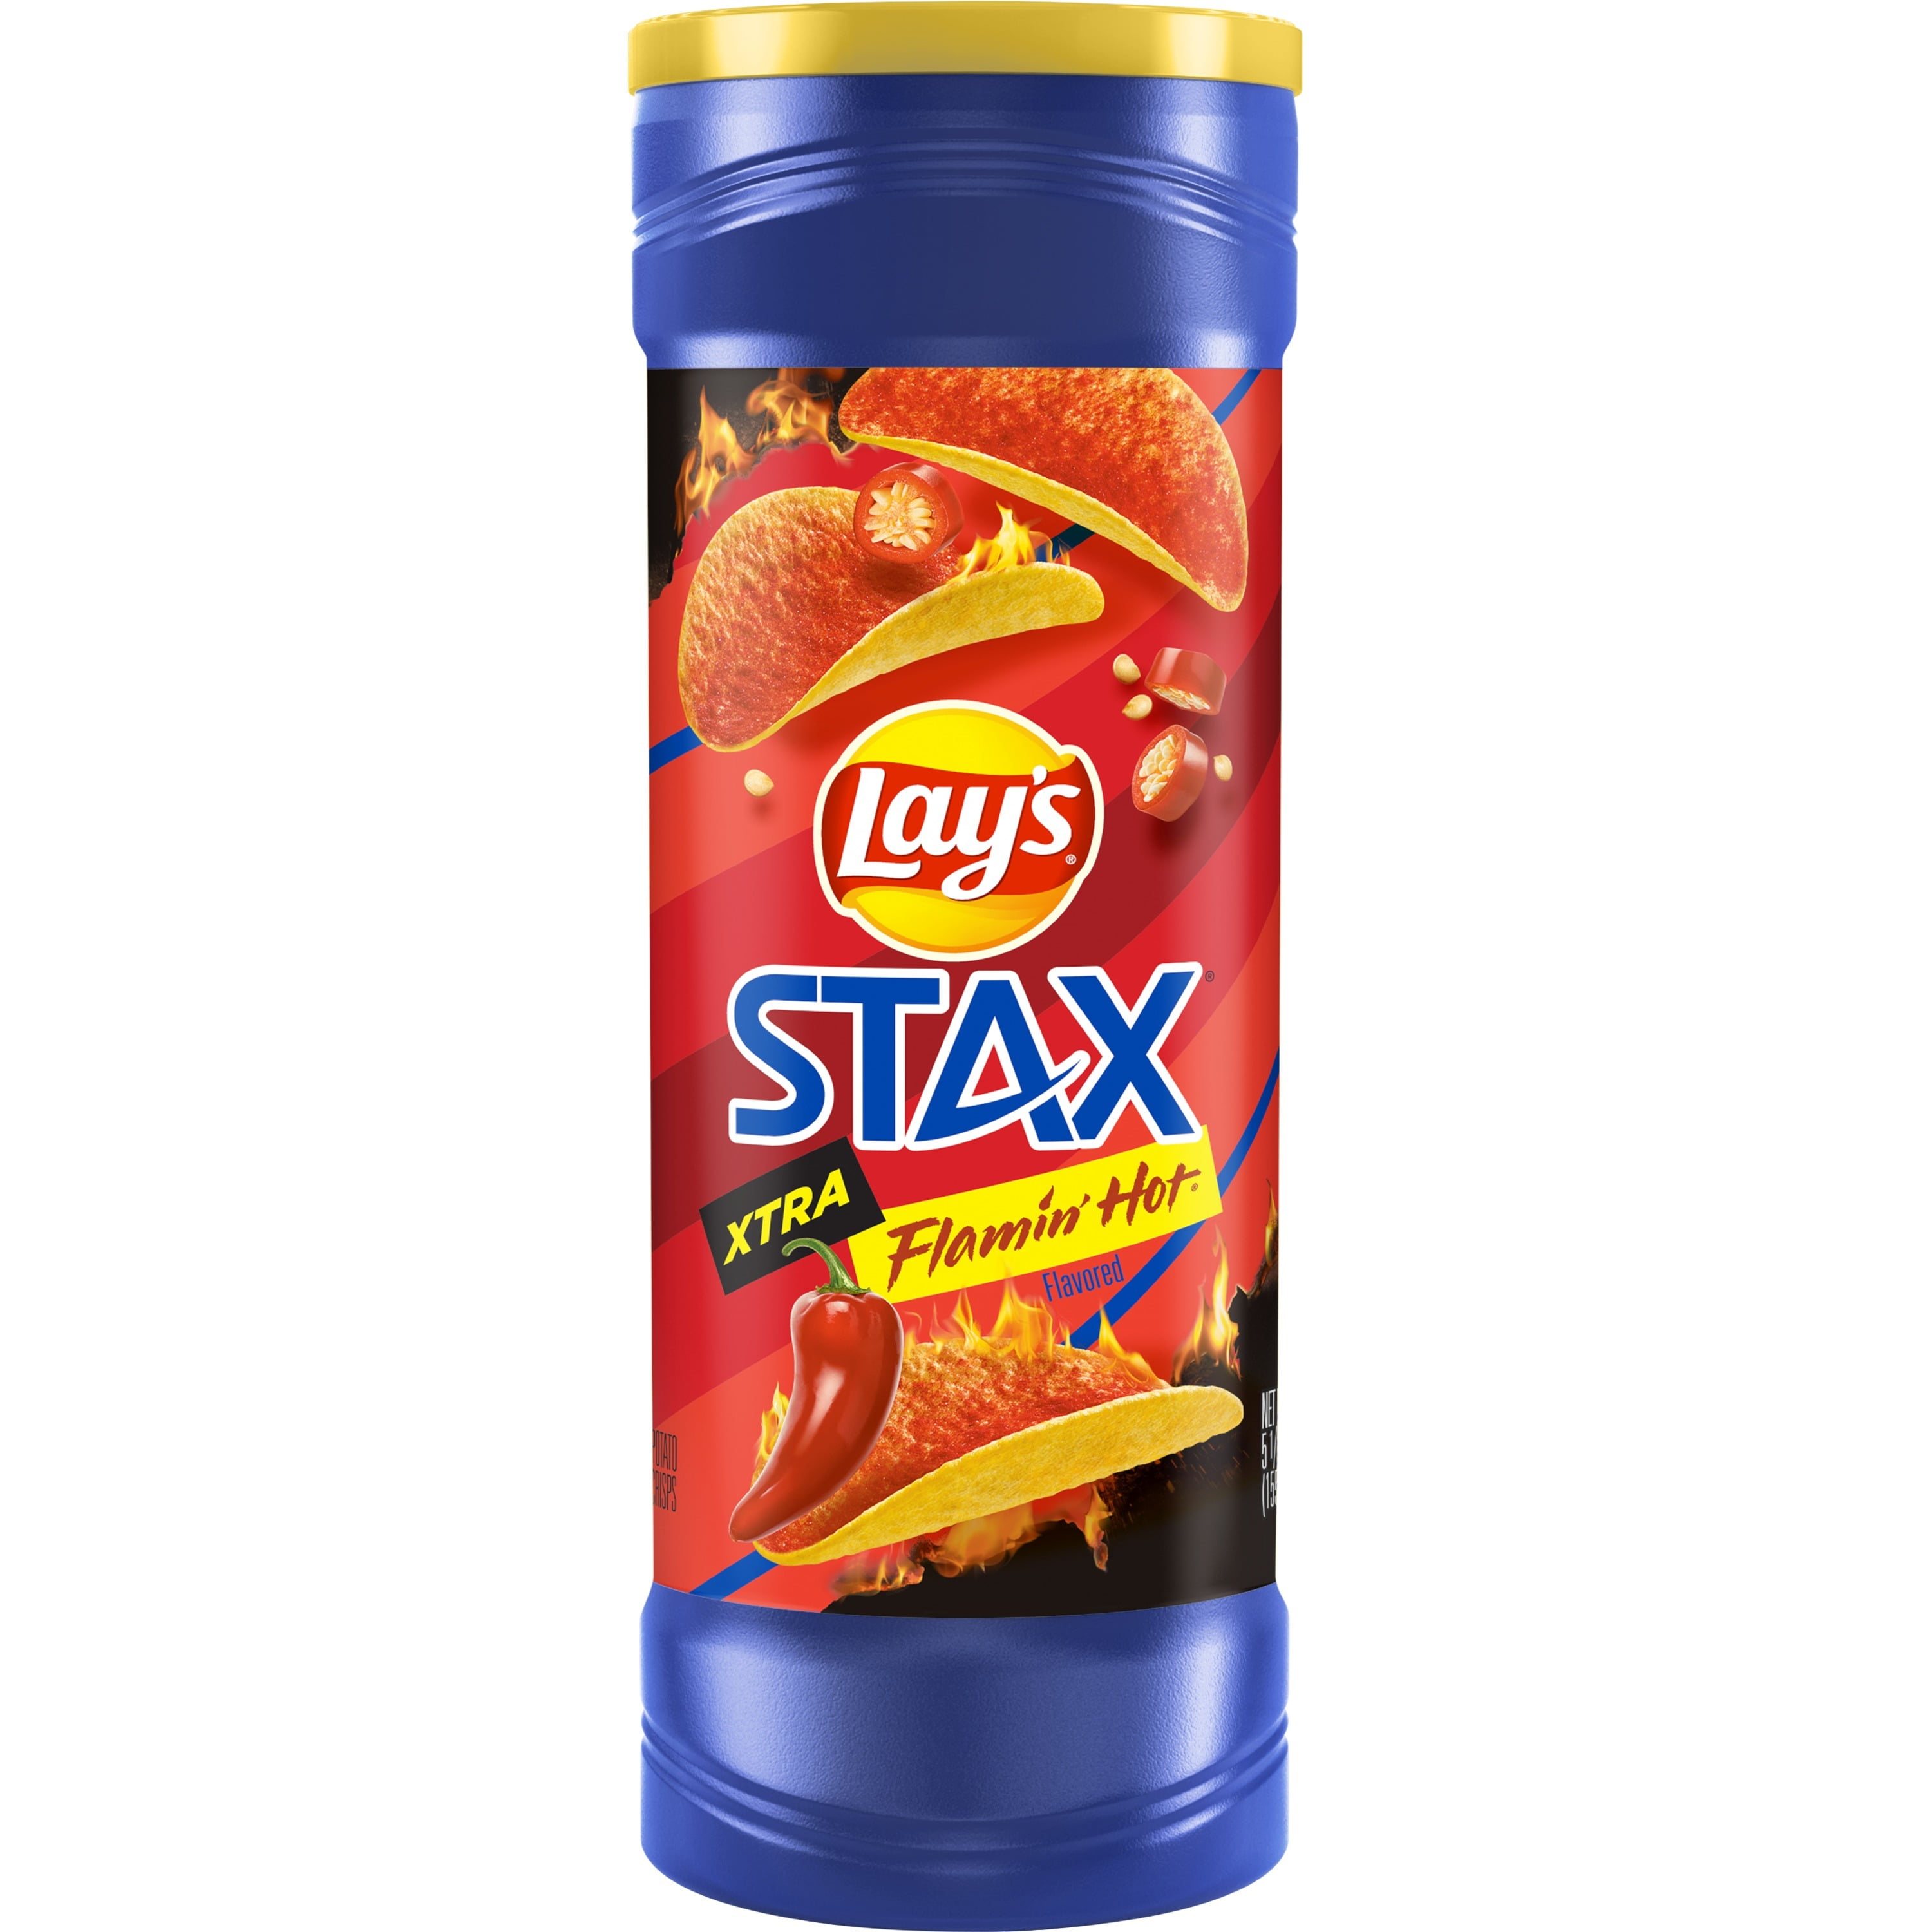 Lays Stax Xtra Flamin Hot Potato Chips 55 Oz Canister